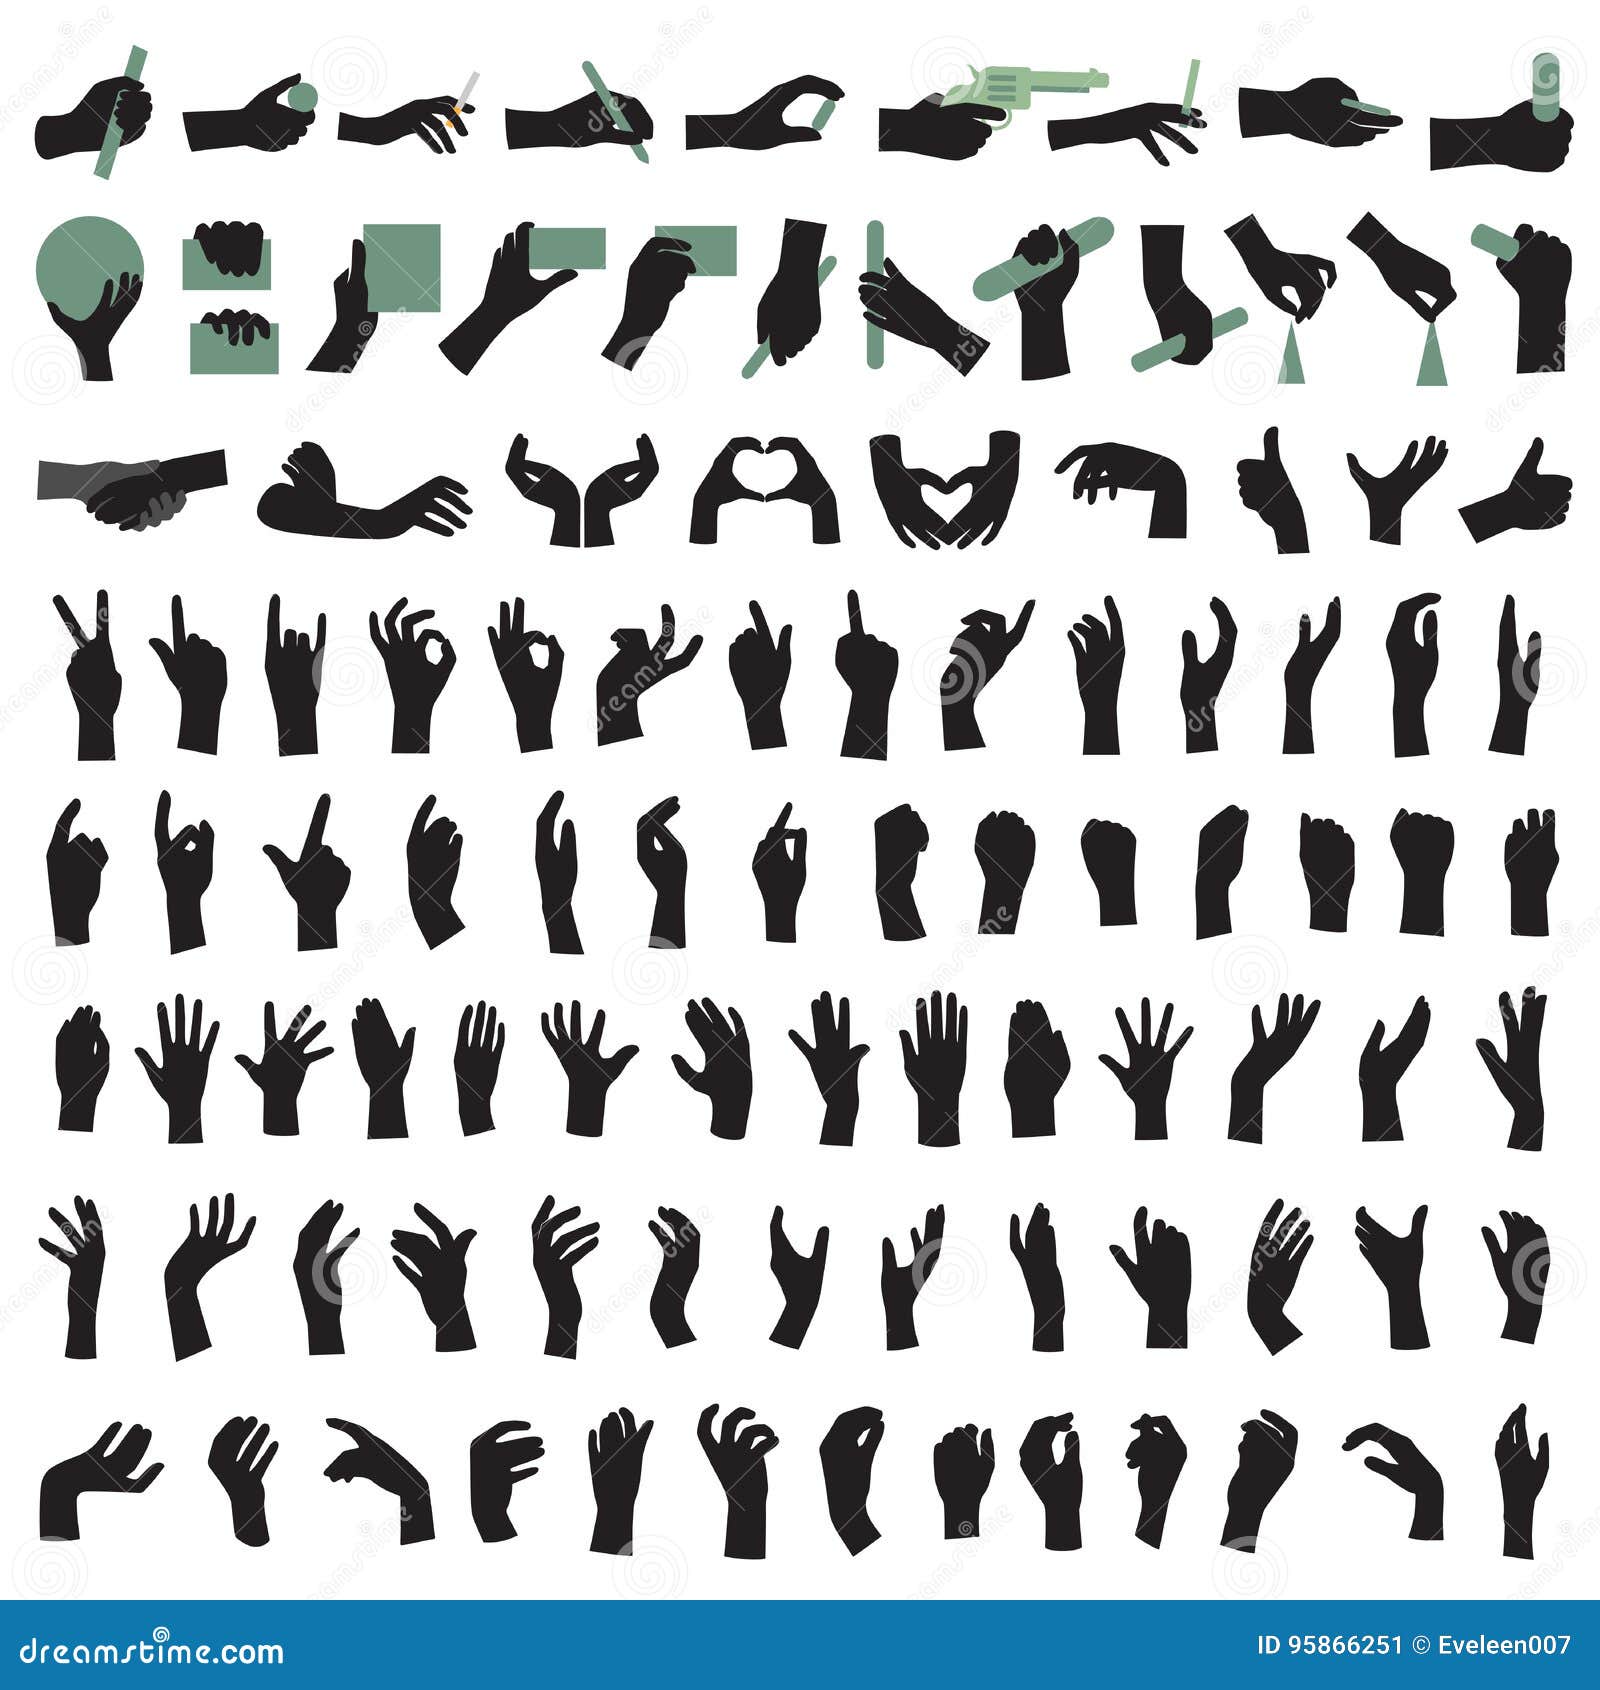 hand gestures silhouettes